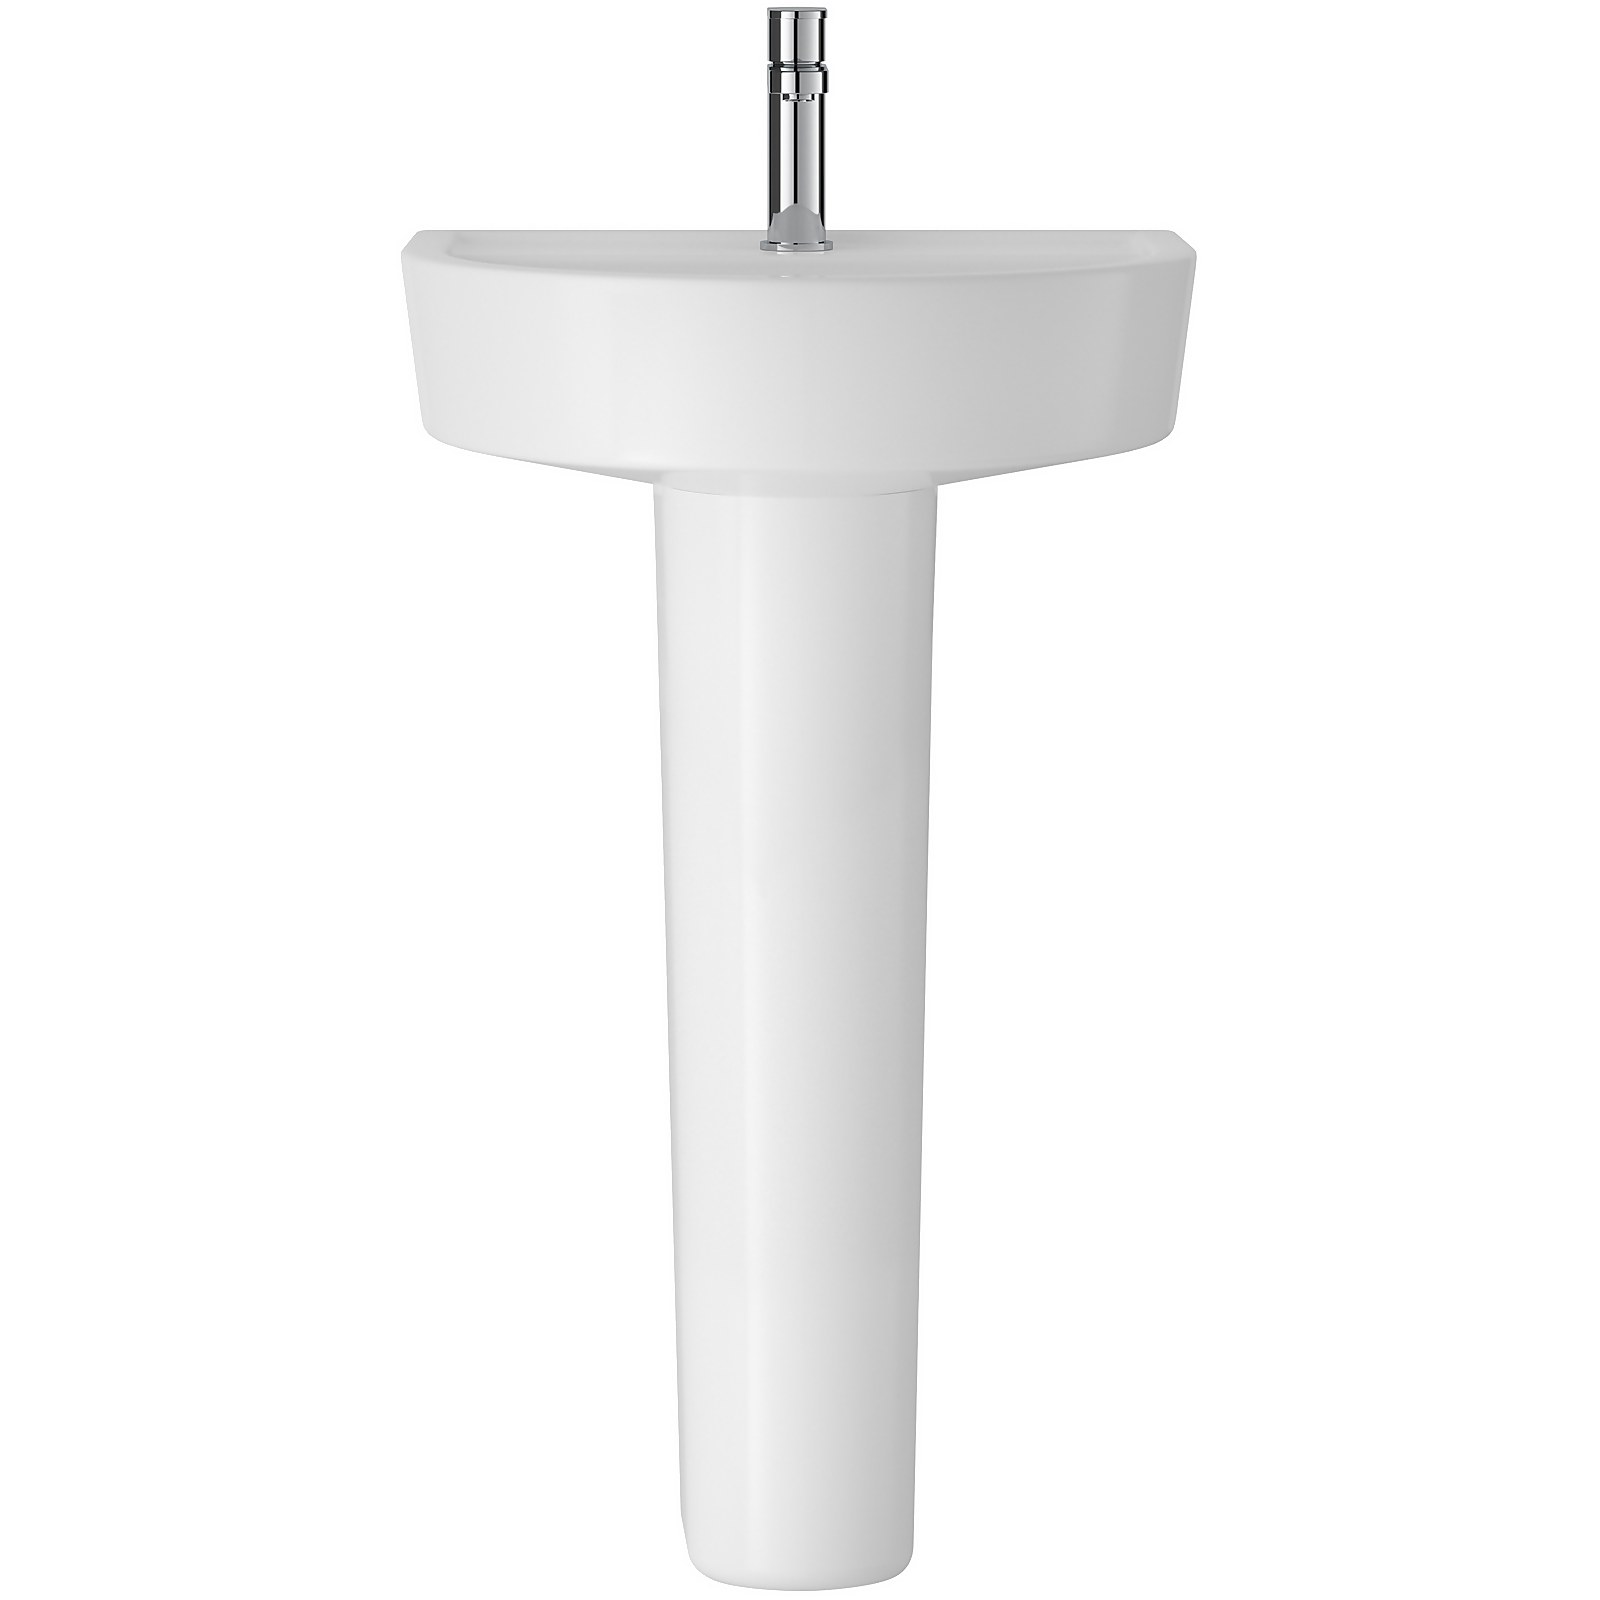 Photo of Balterley Mila 1 Tap Hole Basin And Full Pedestal - 520mm